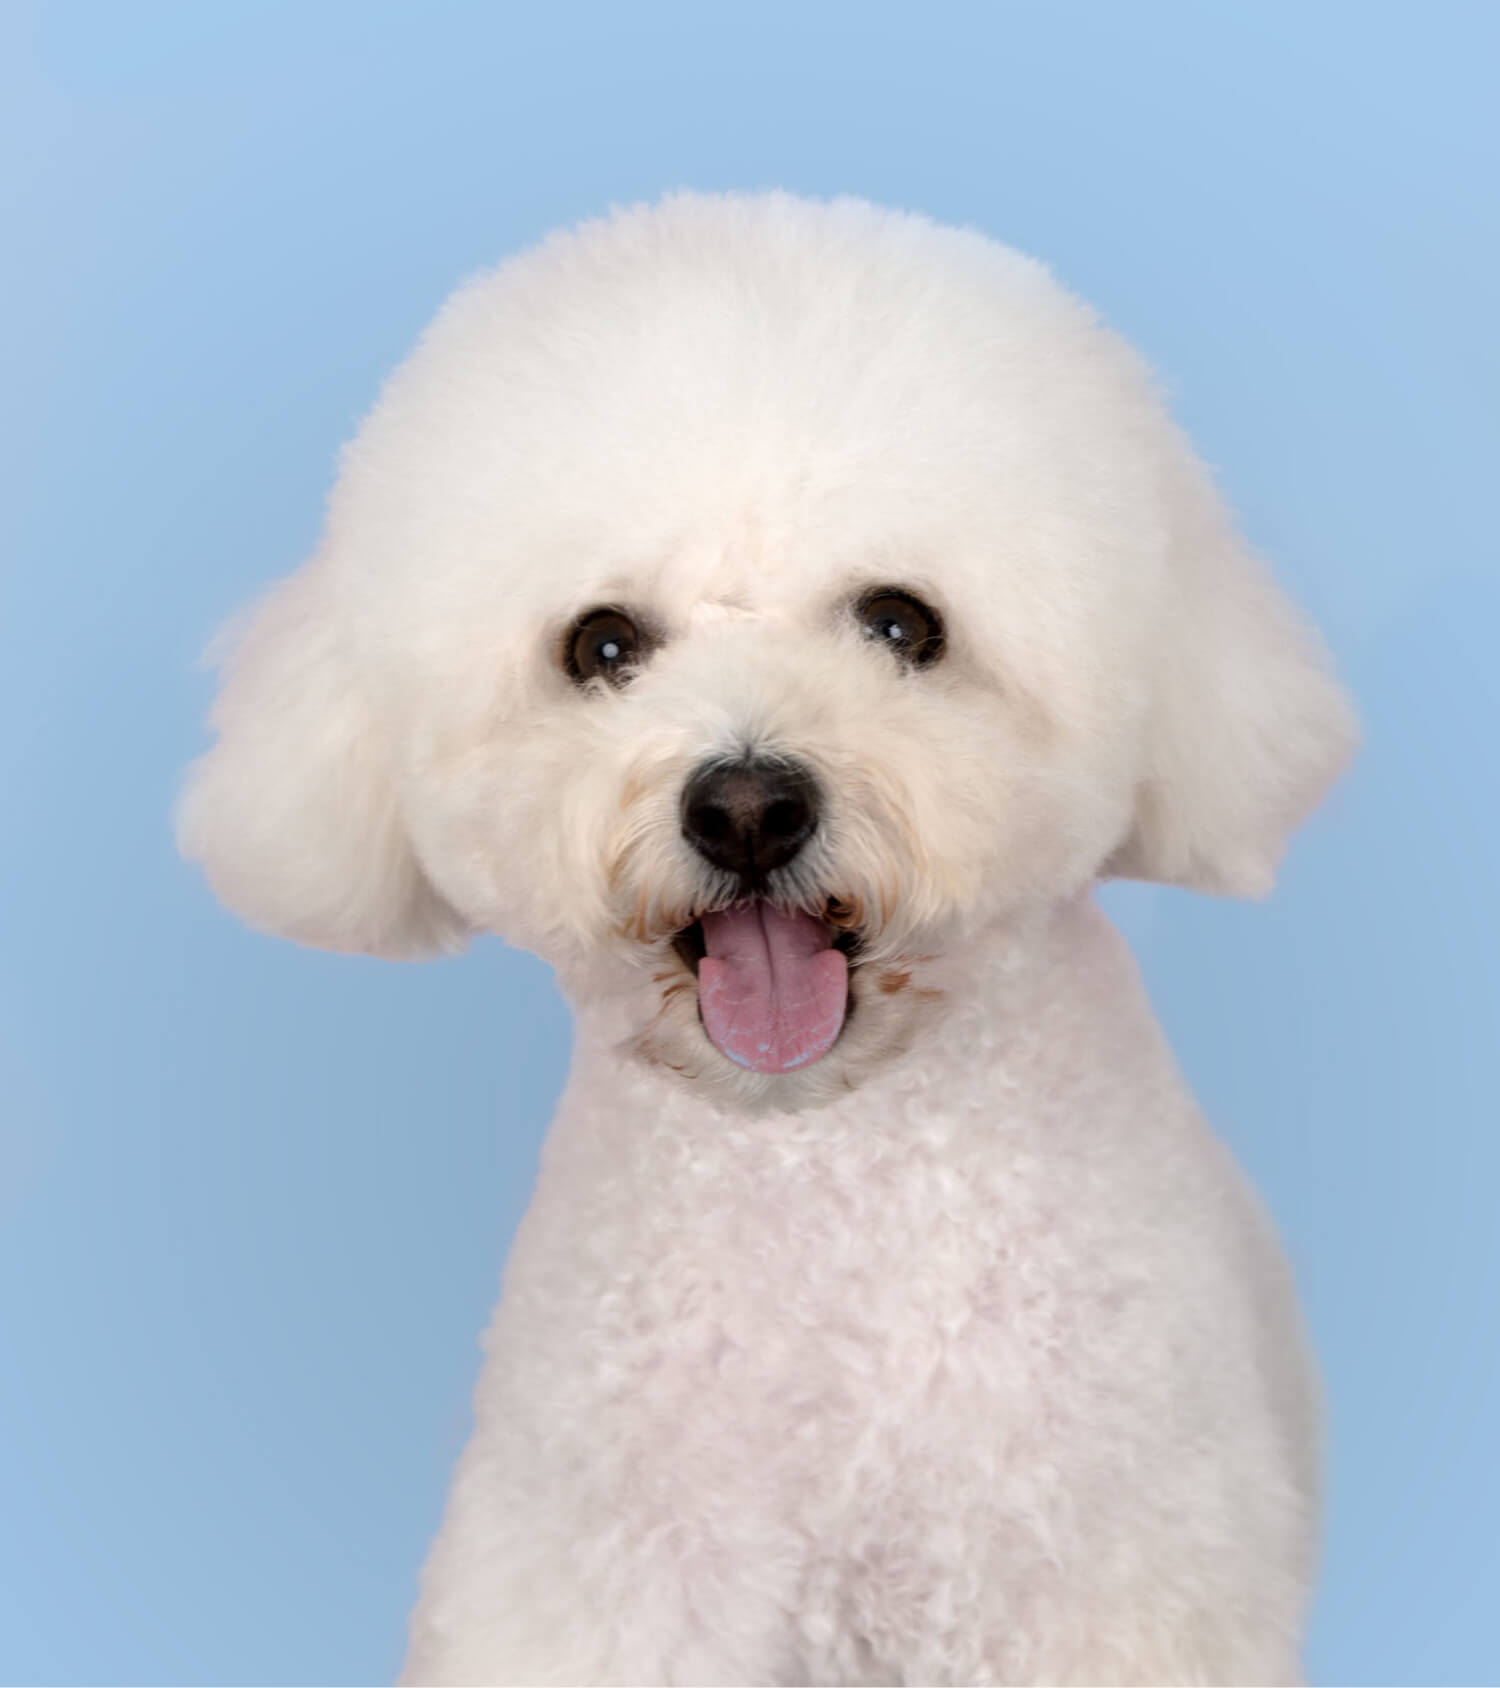 Small white dog after using Plume dog grooming products